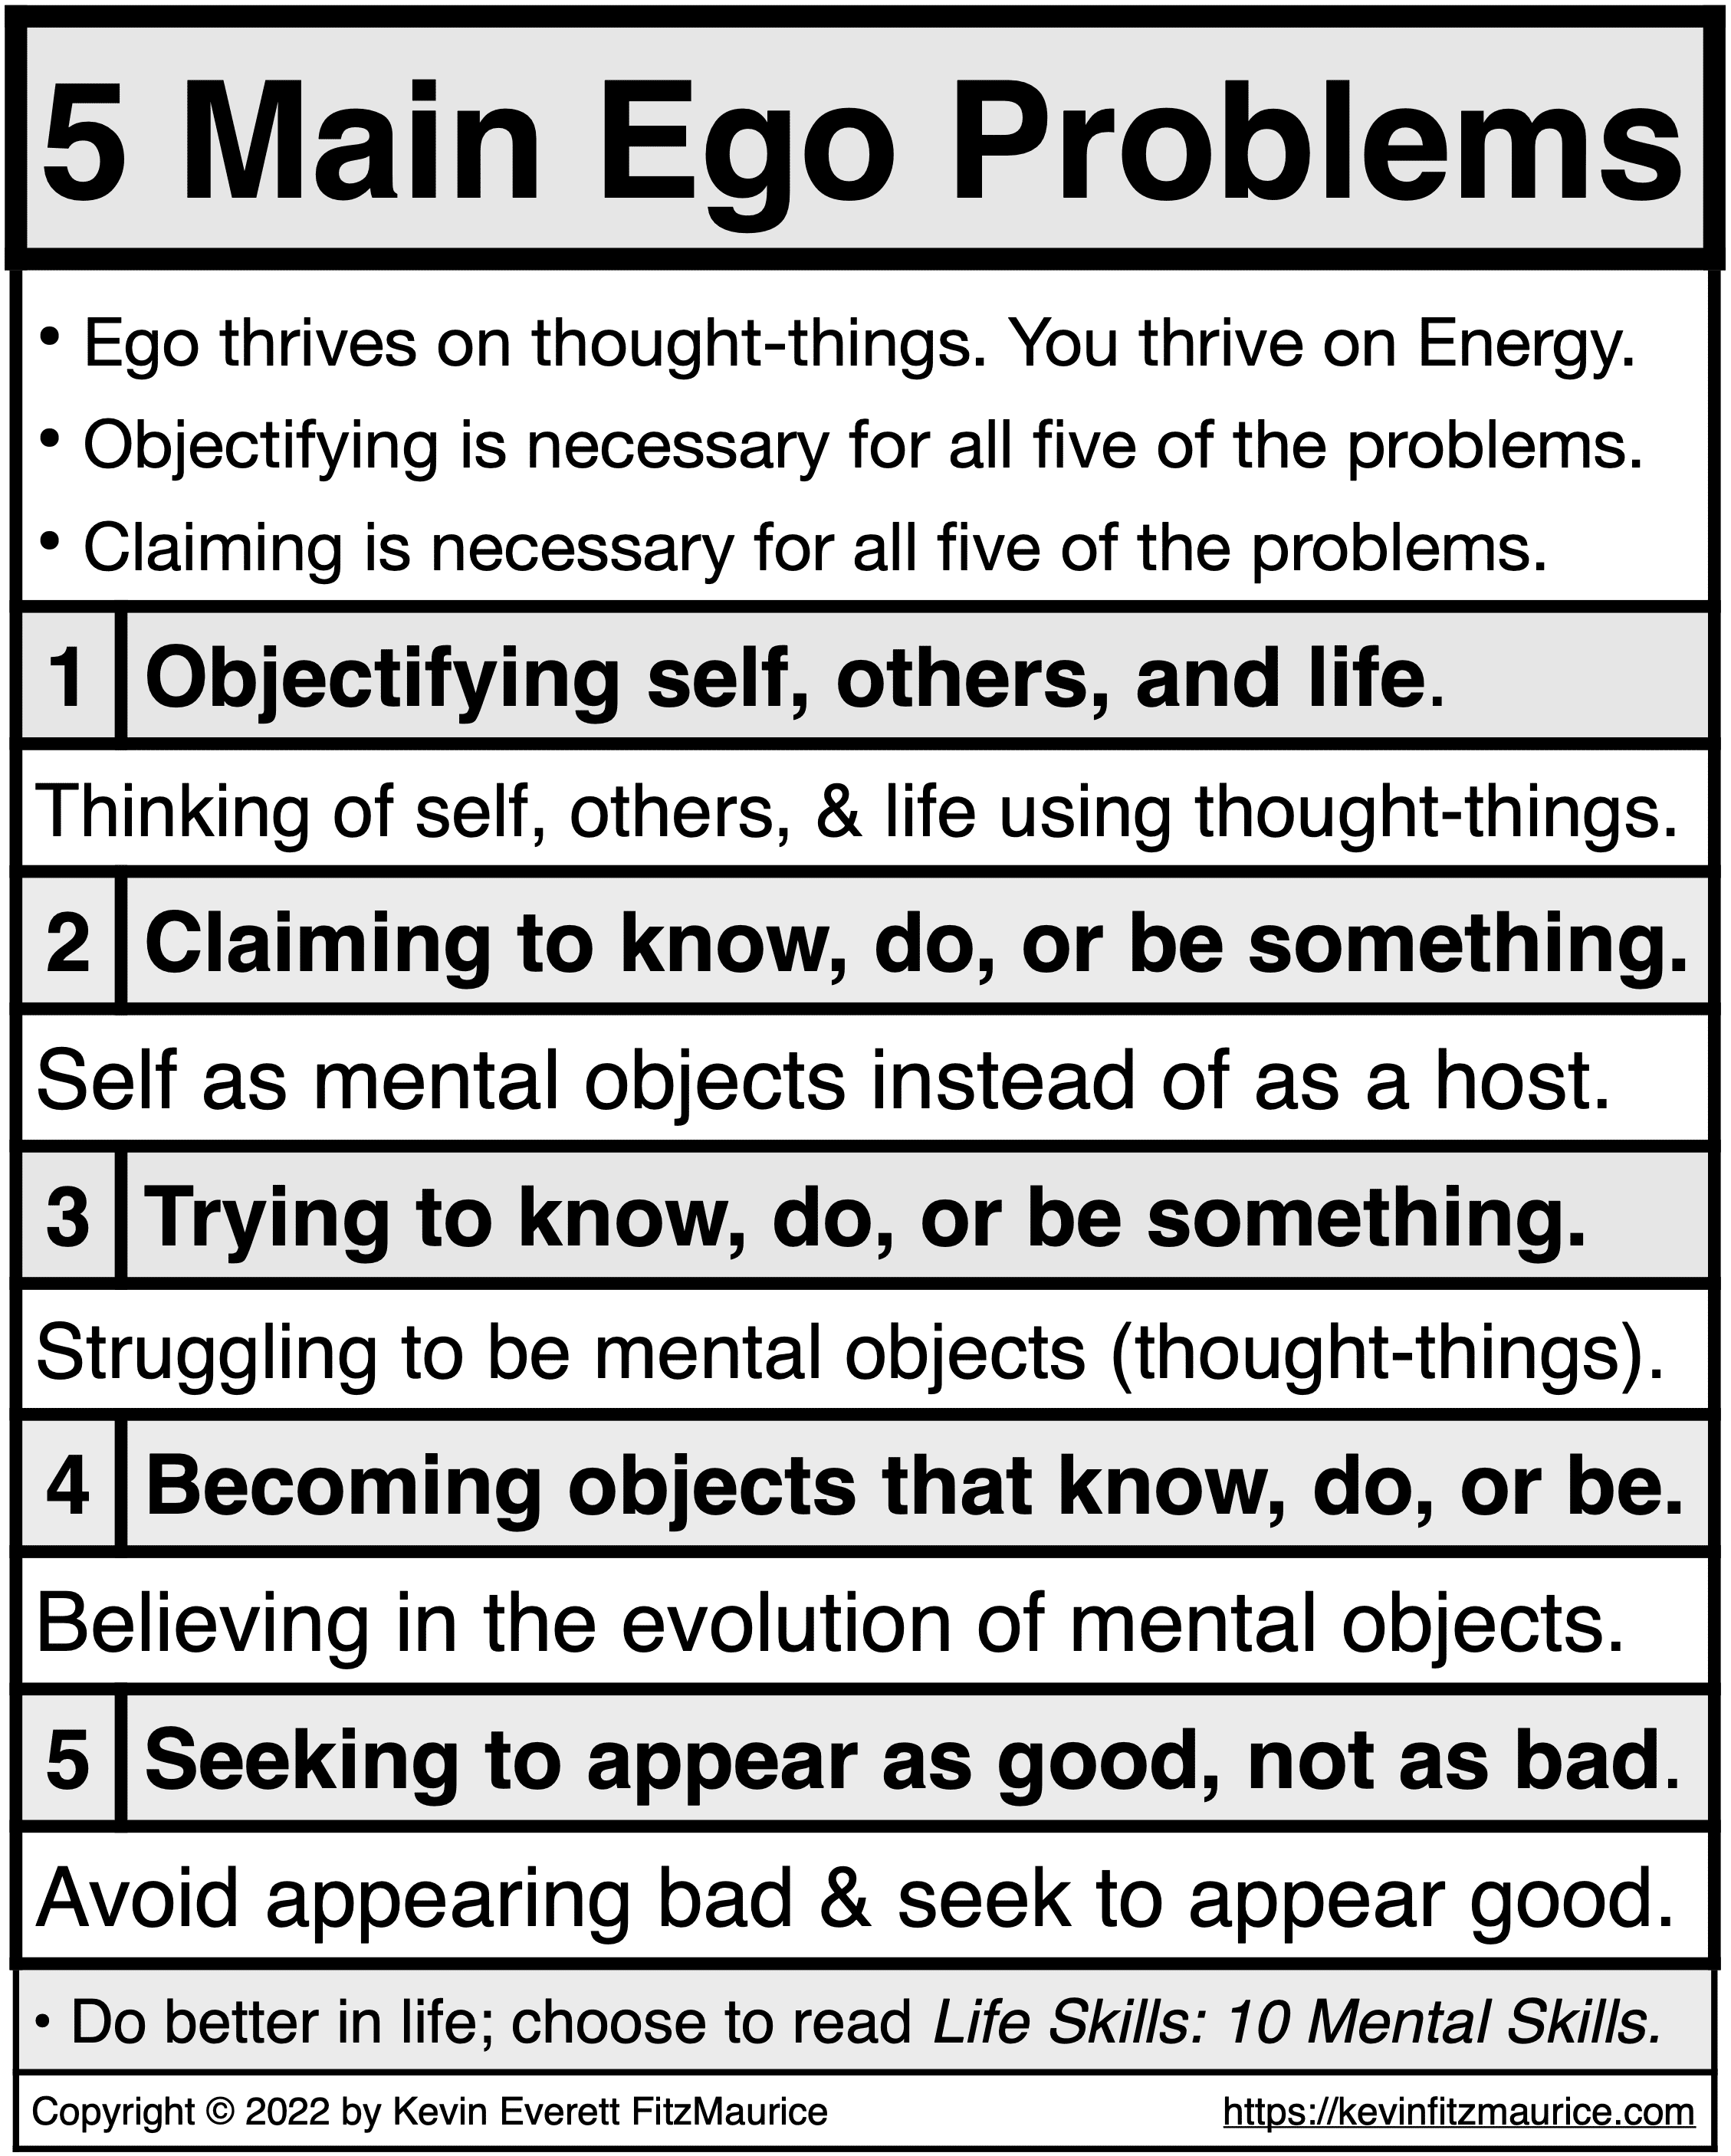 There Are 5 Main Ego Problems